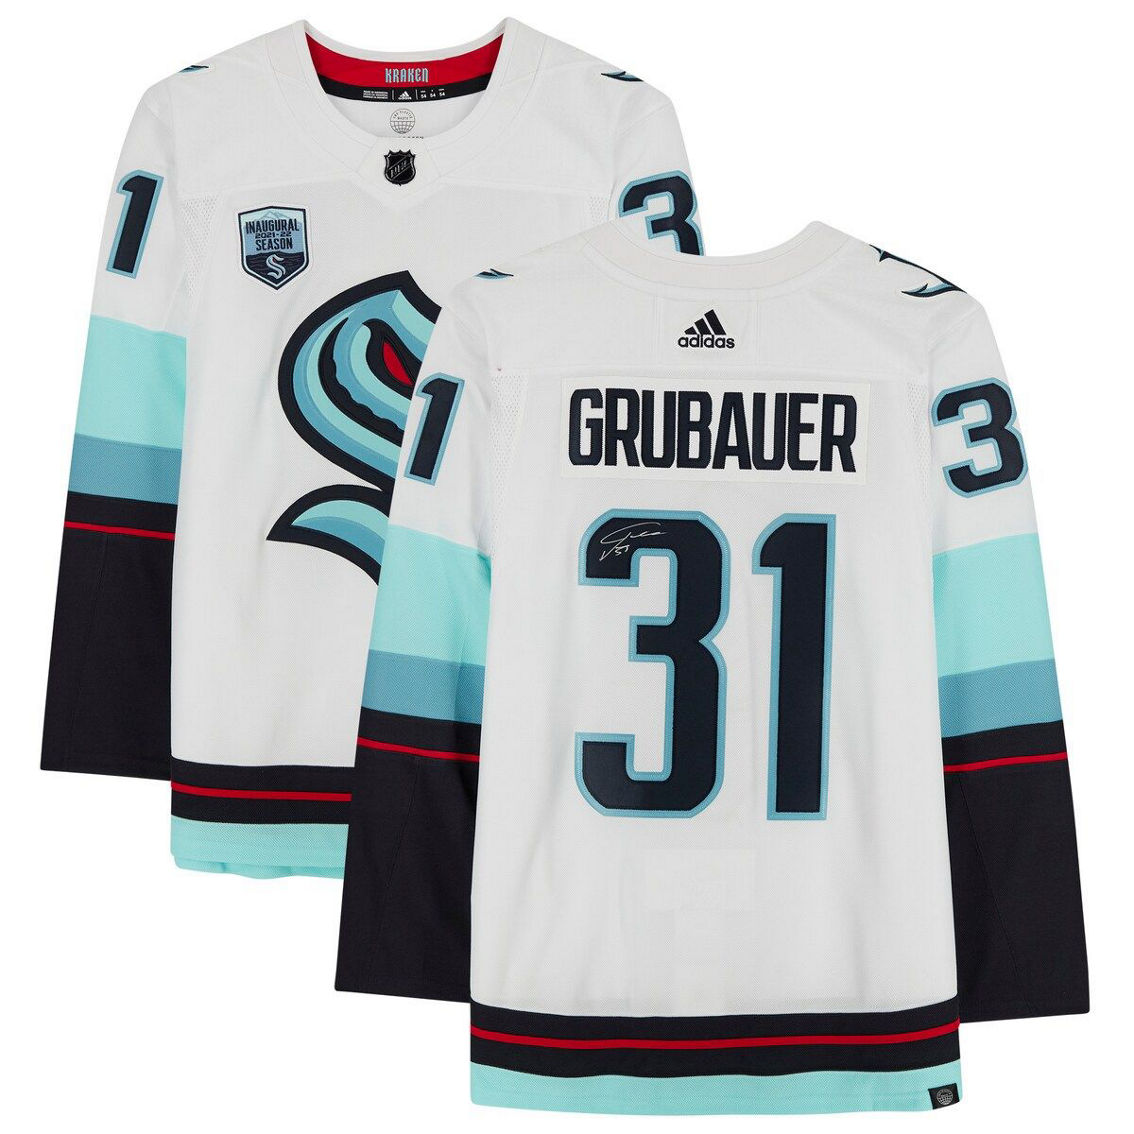 Fanatics Authentic Philipp Grubauer Seattle Kraken Autographed White Authentic Jersey with Inaugural Season Jersey Patch - Image 2 of 4